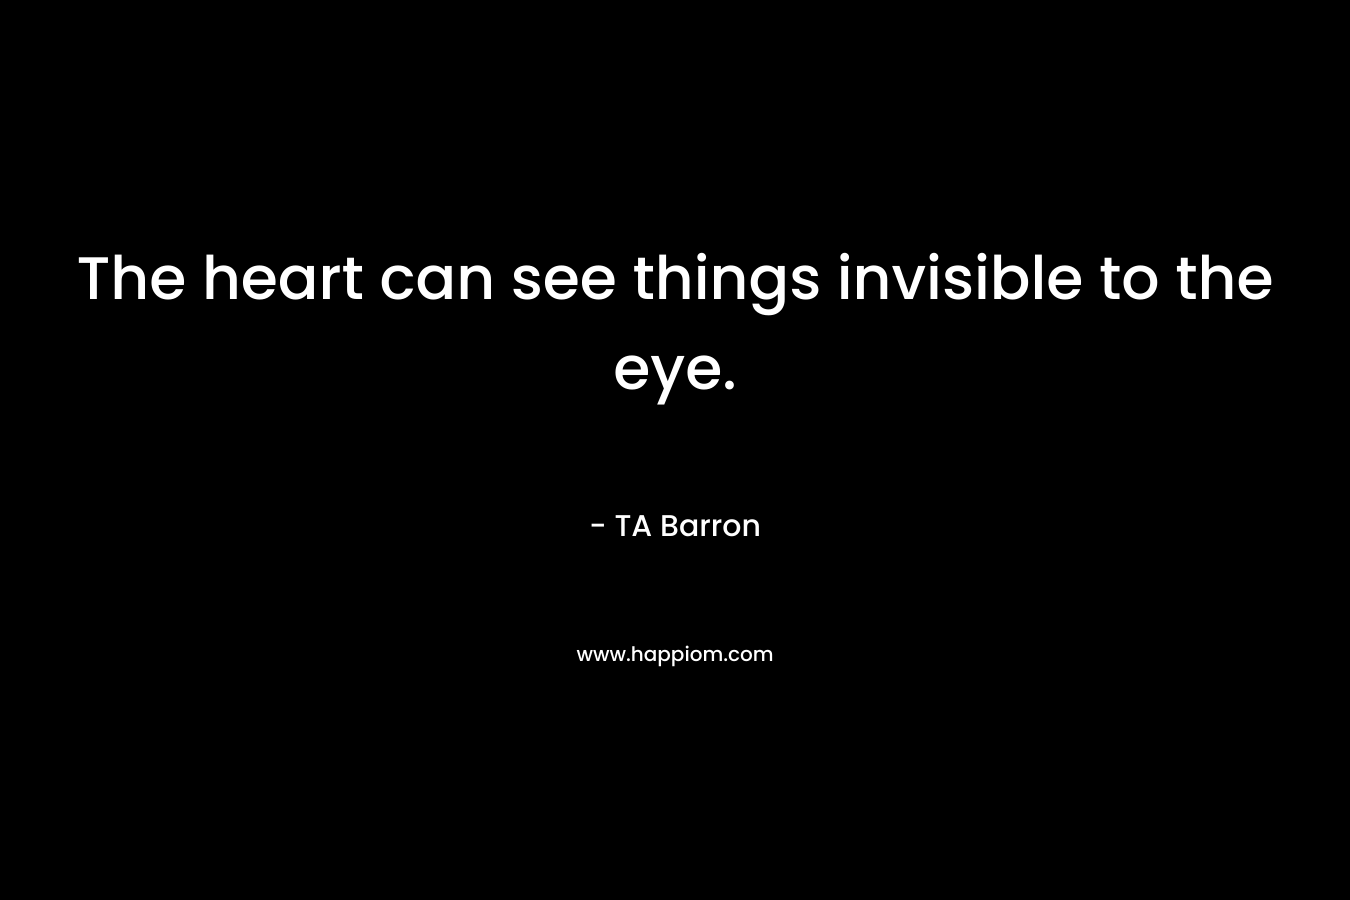 The heart can see things invisible to the eye. – TA Barron